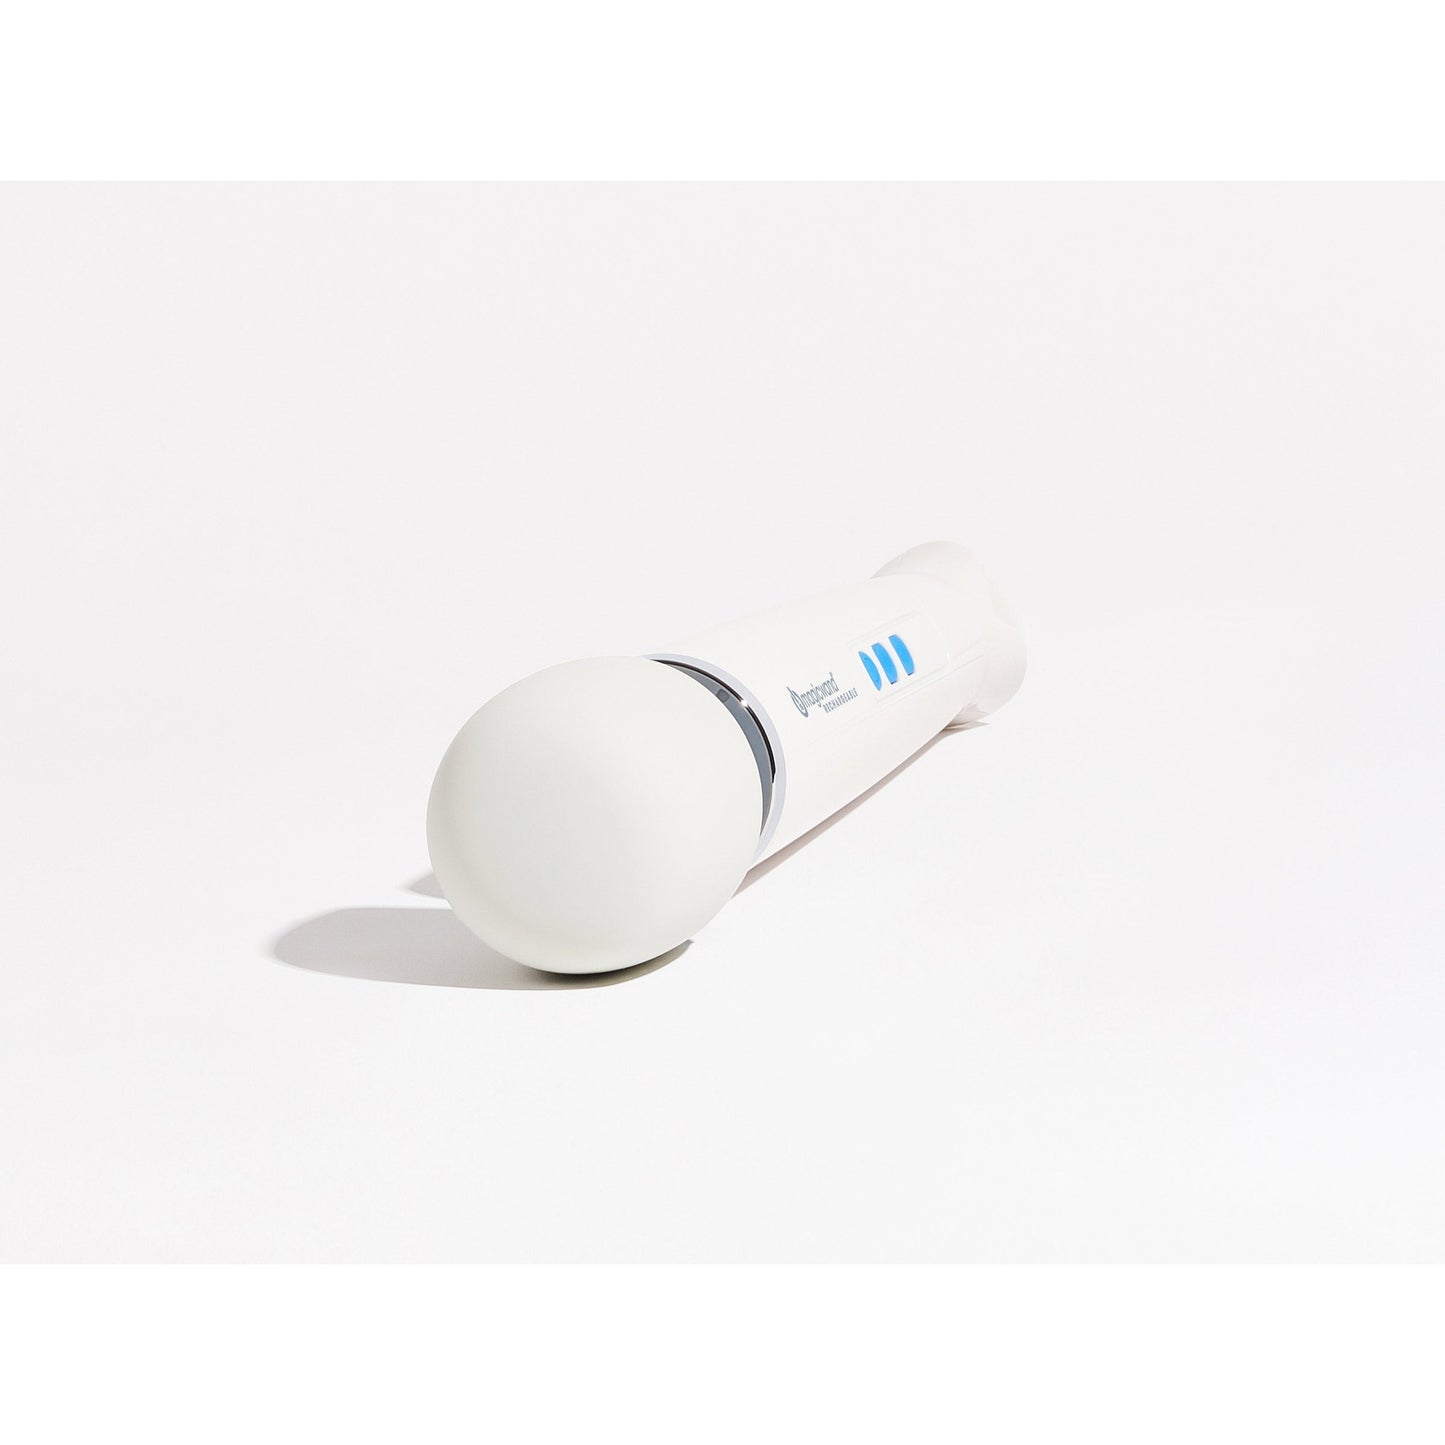 Magic Wand Rechargeable - White